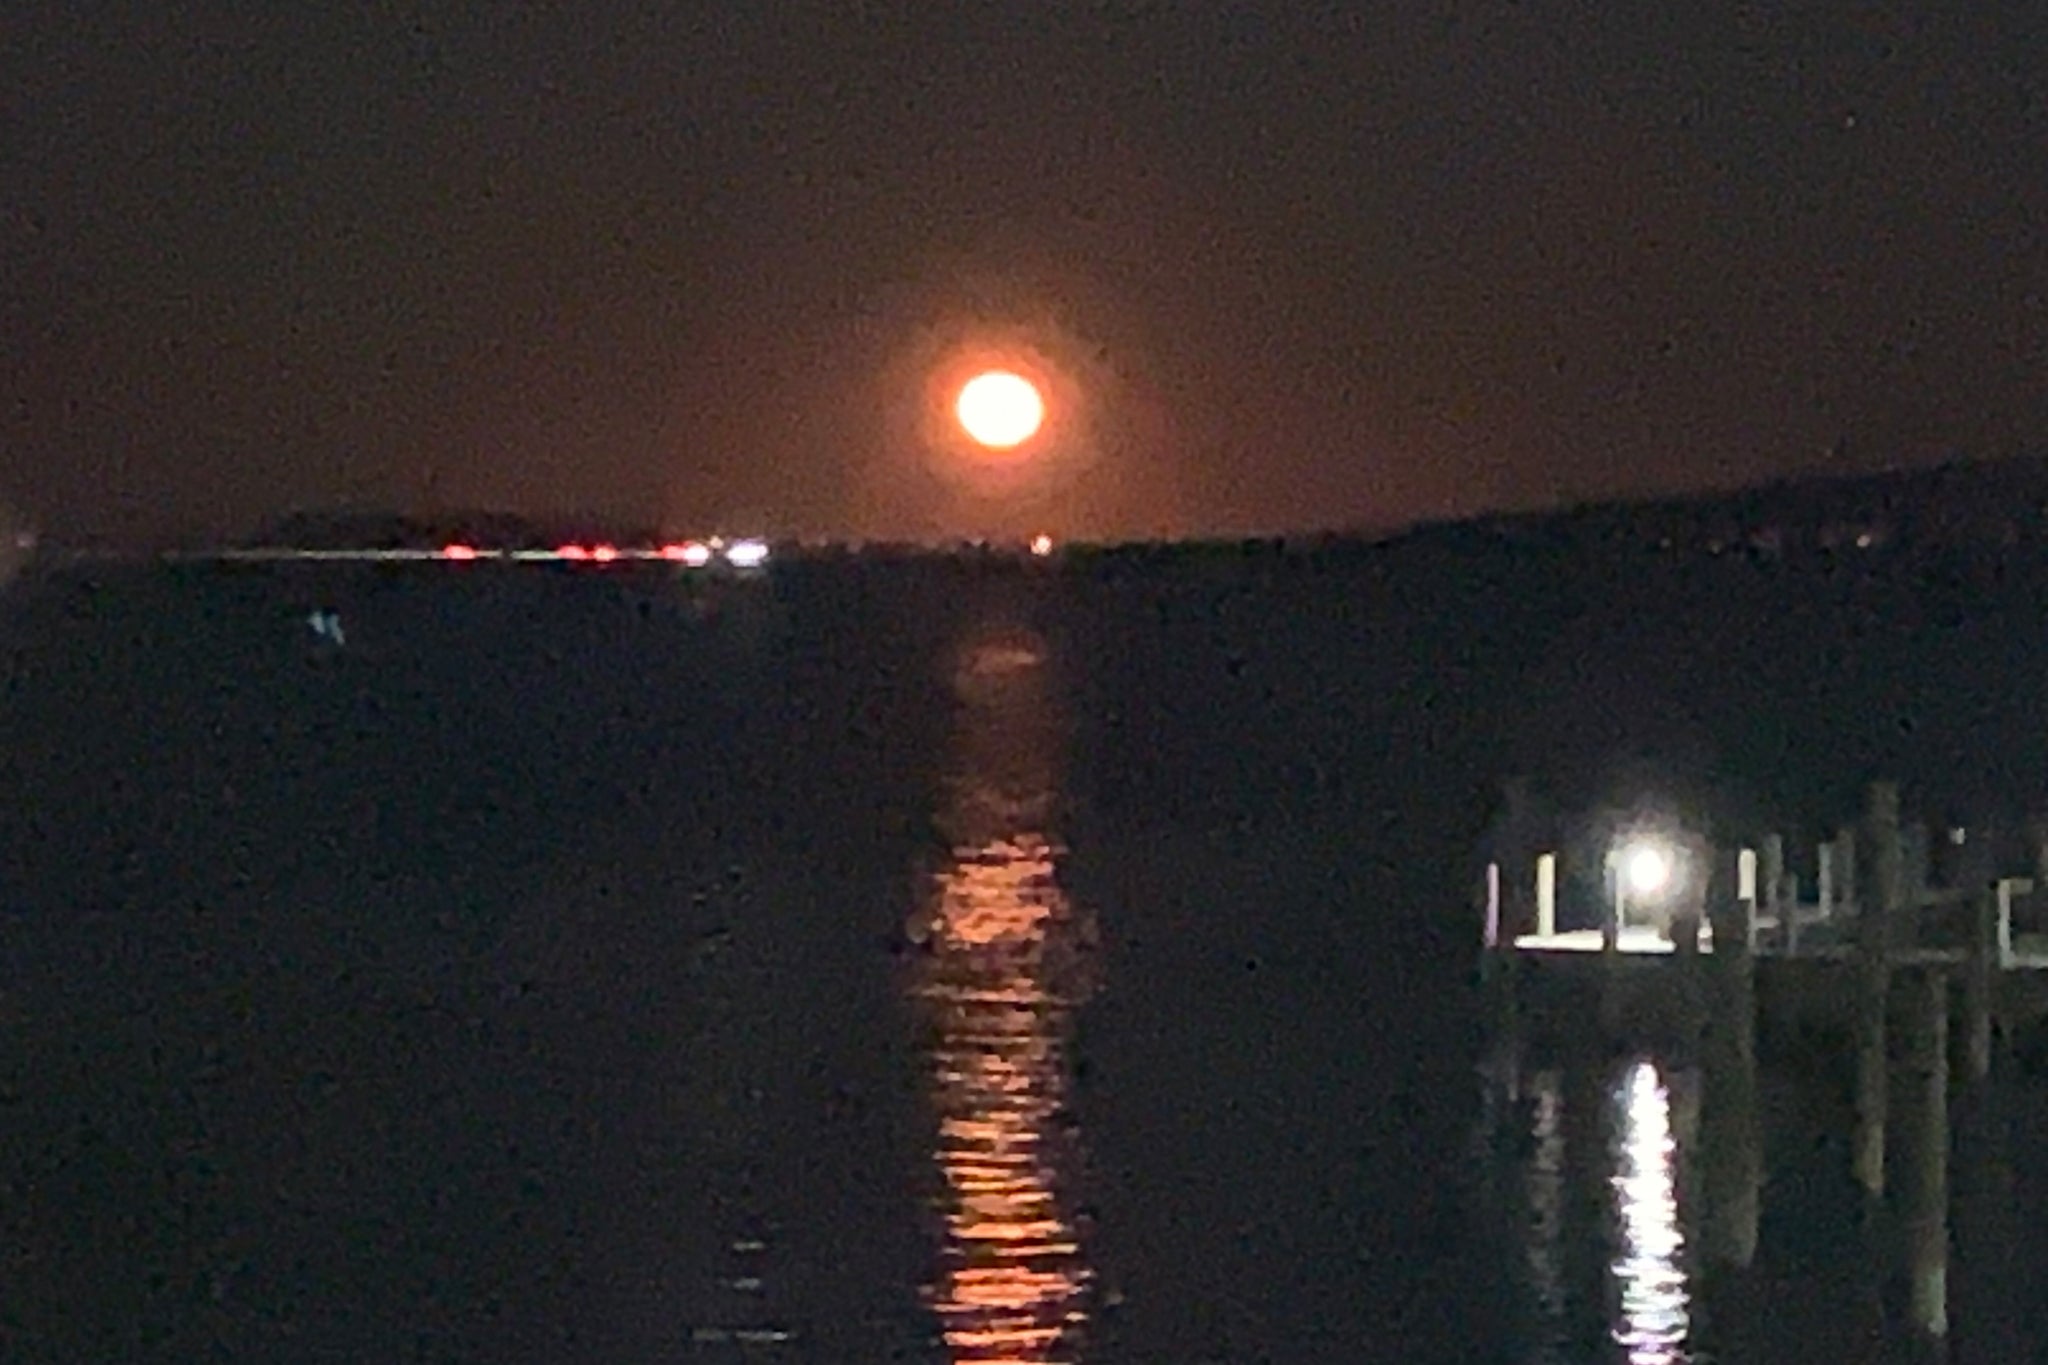 PC815: Pearl Of The Sound l Deck View - Full Moon